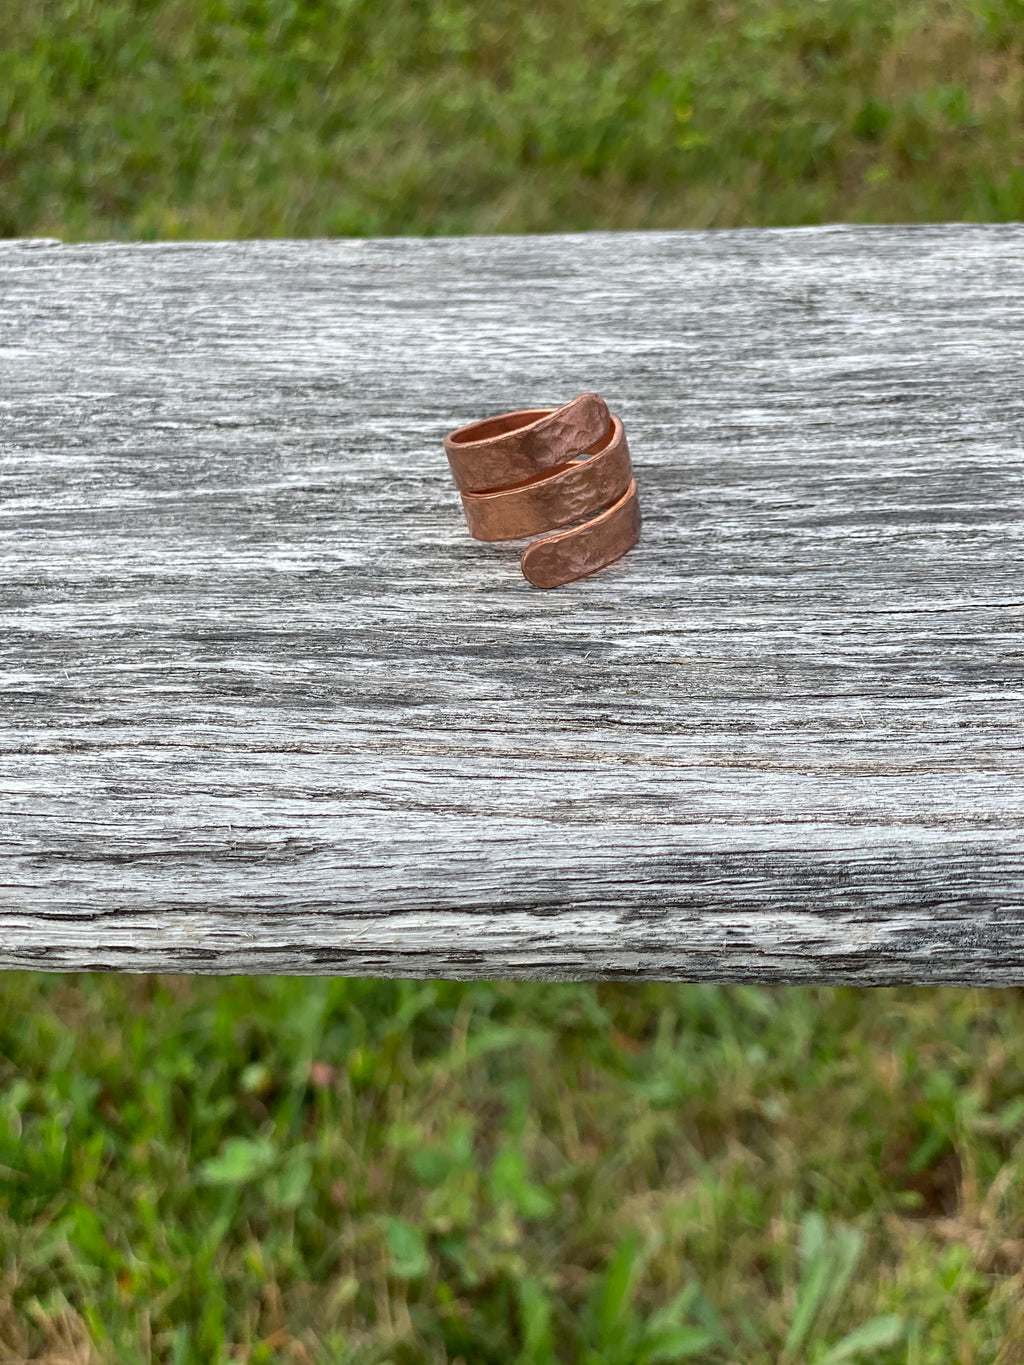 Hammered Copper Ring in Greenfield, Maine